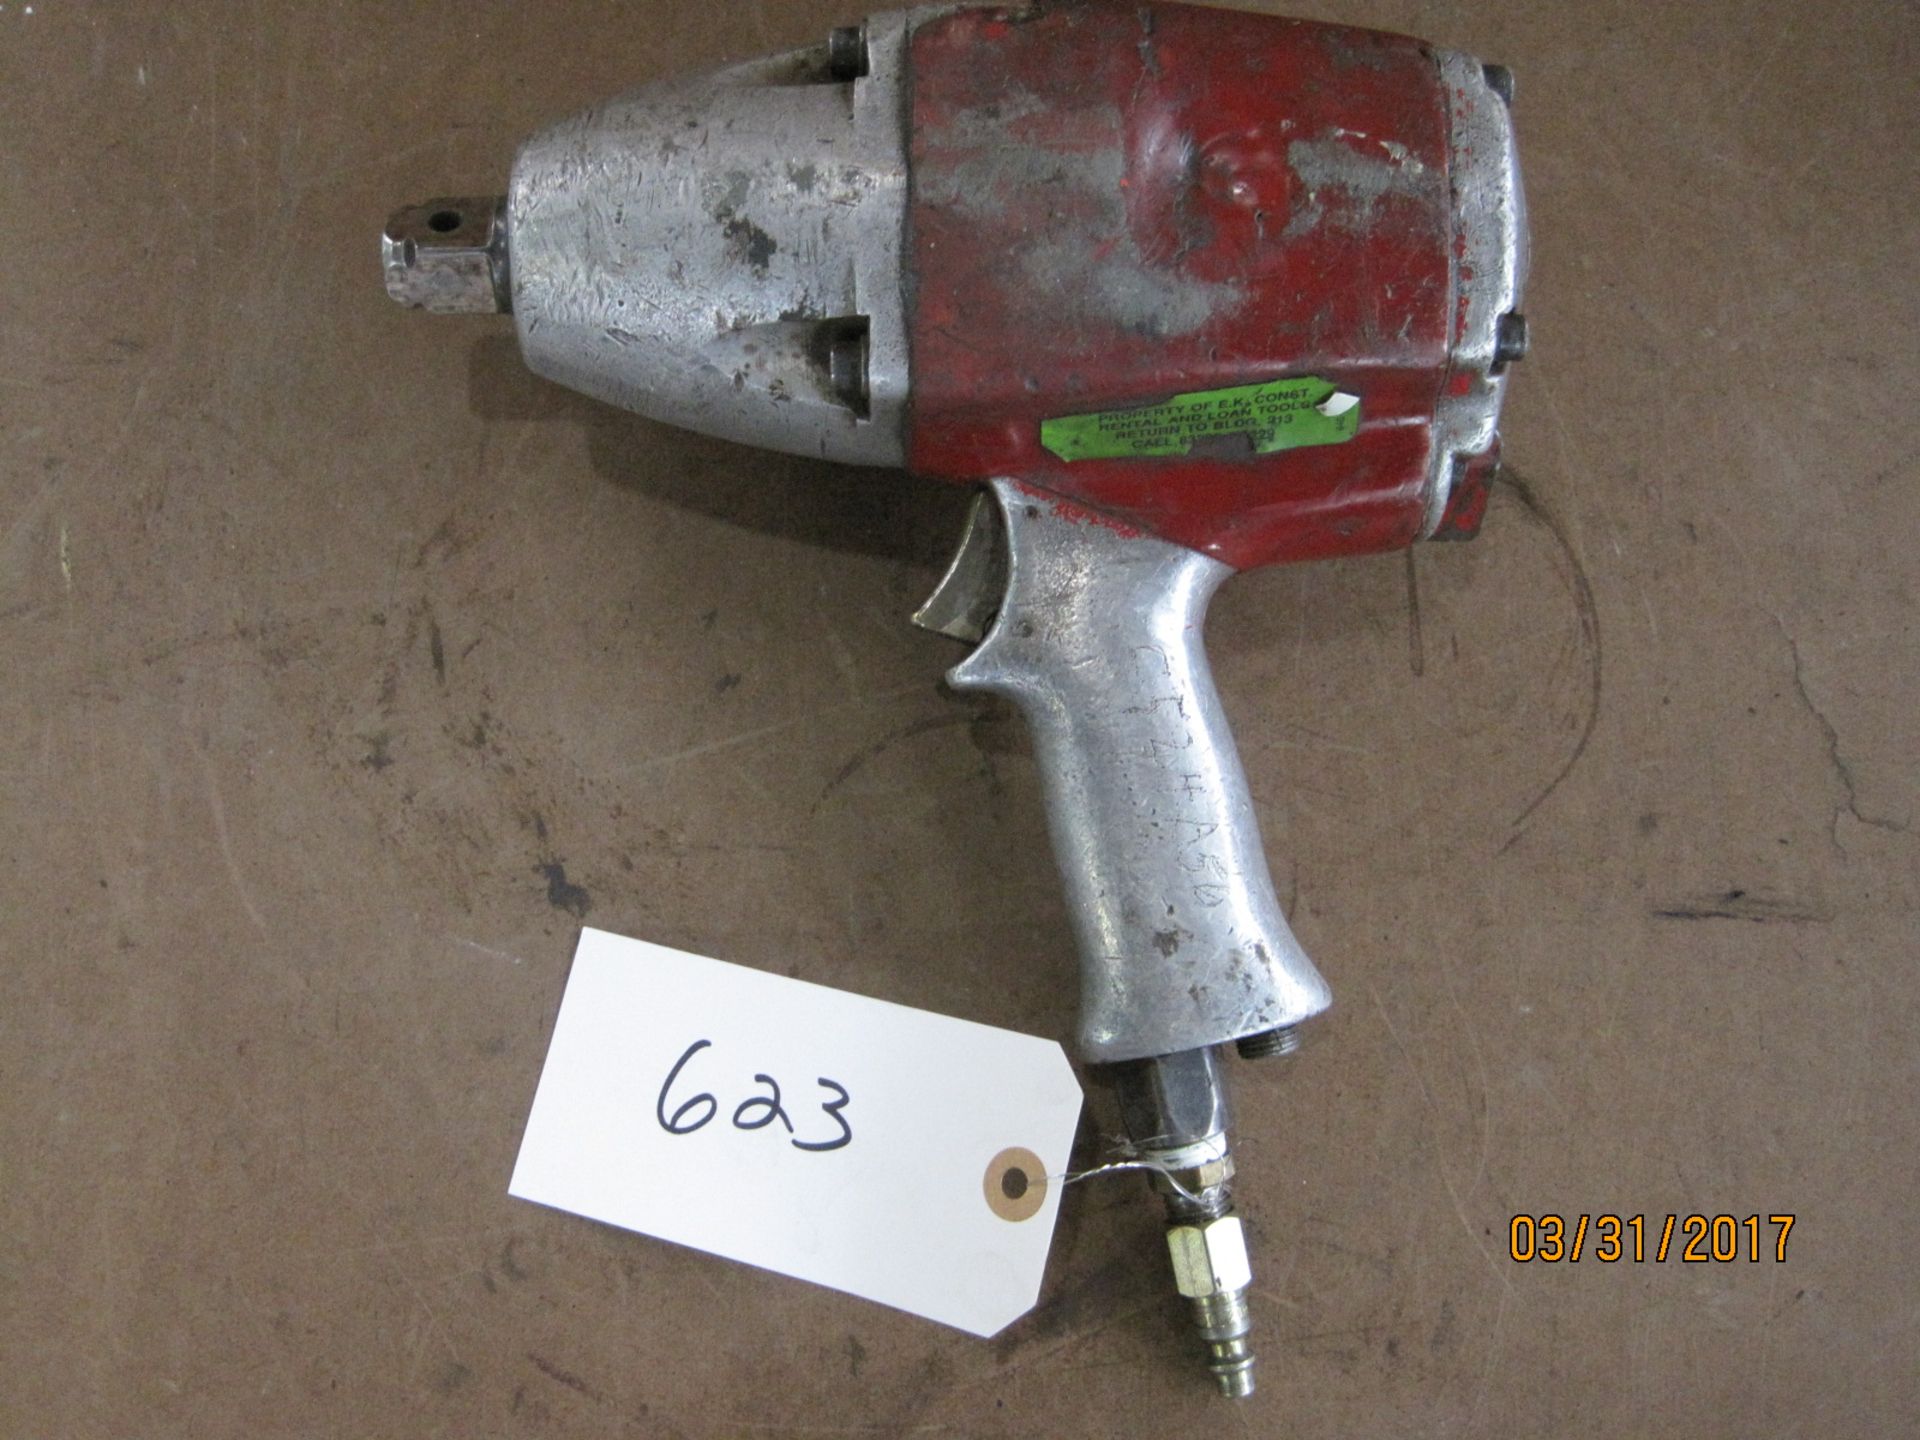 Chicago Pneumatic 3/4" impact wrench